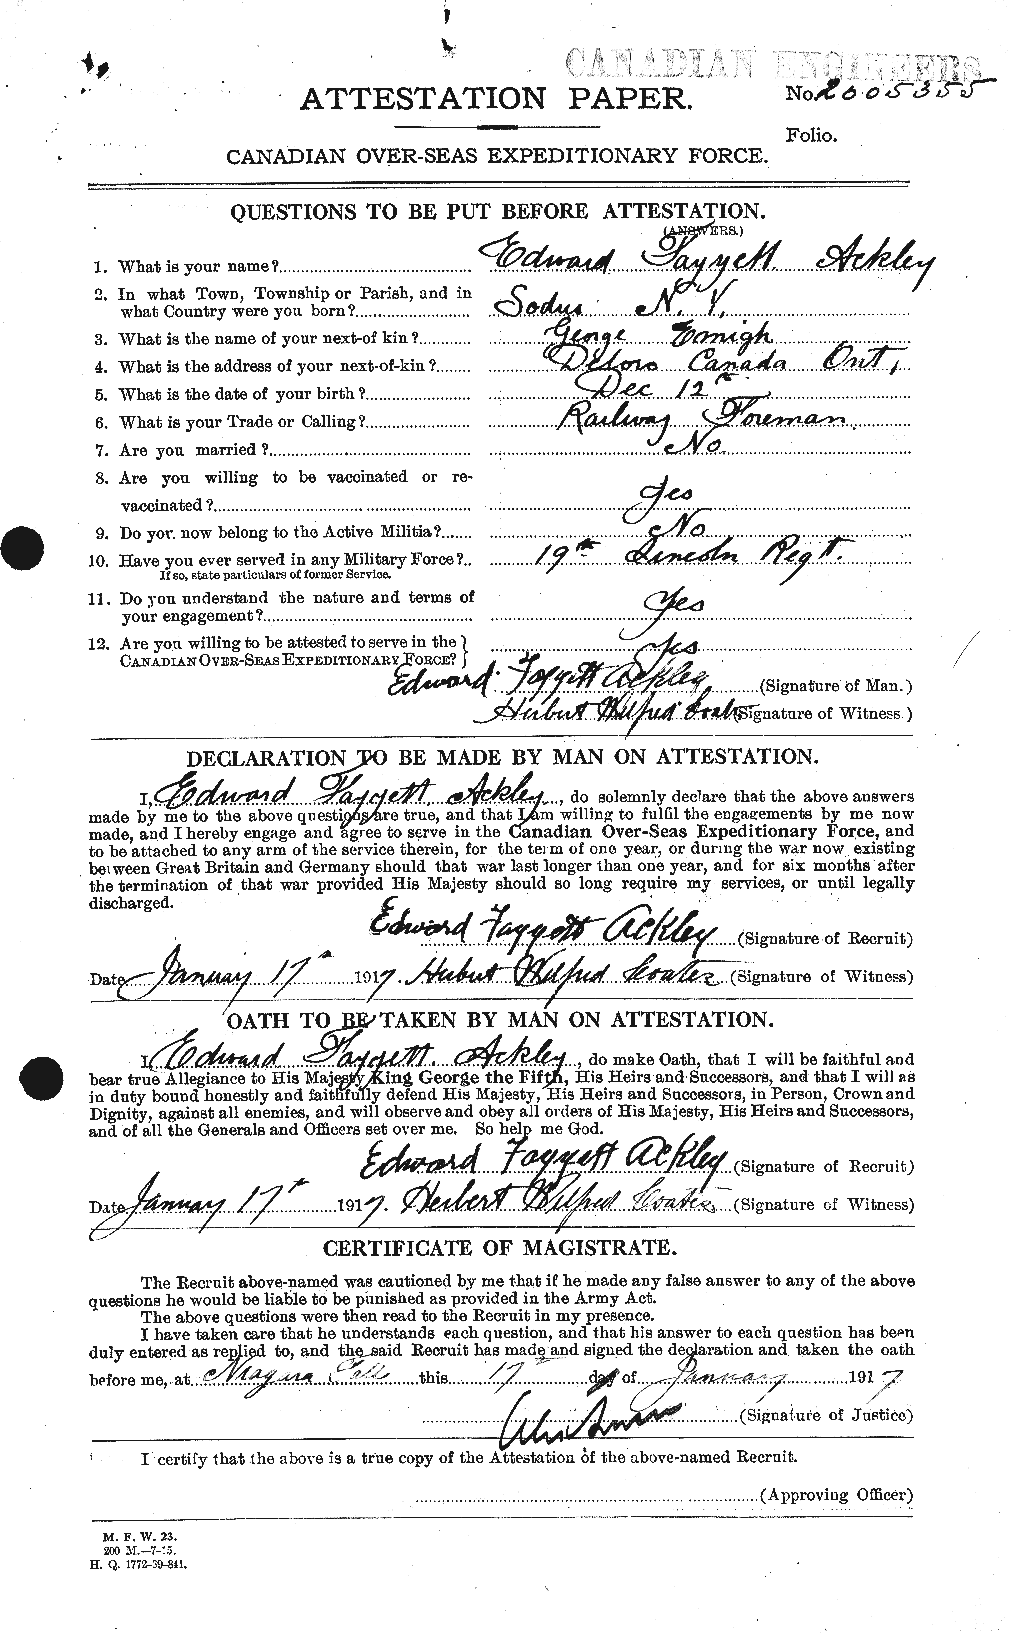 Personnel Records of the First World War - CEF 200697a